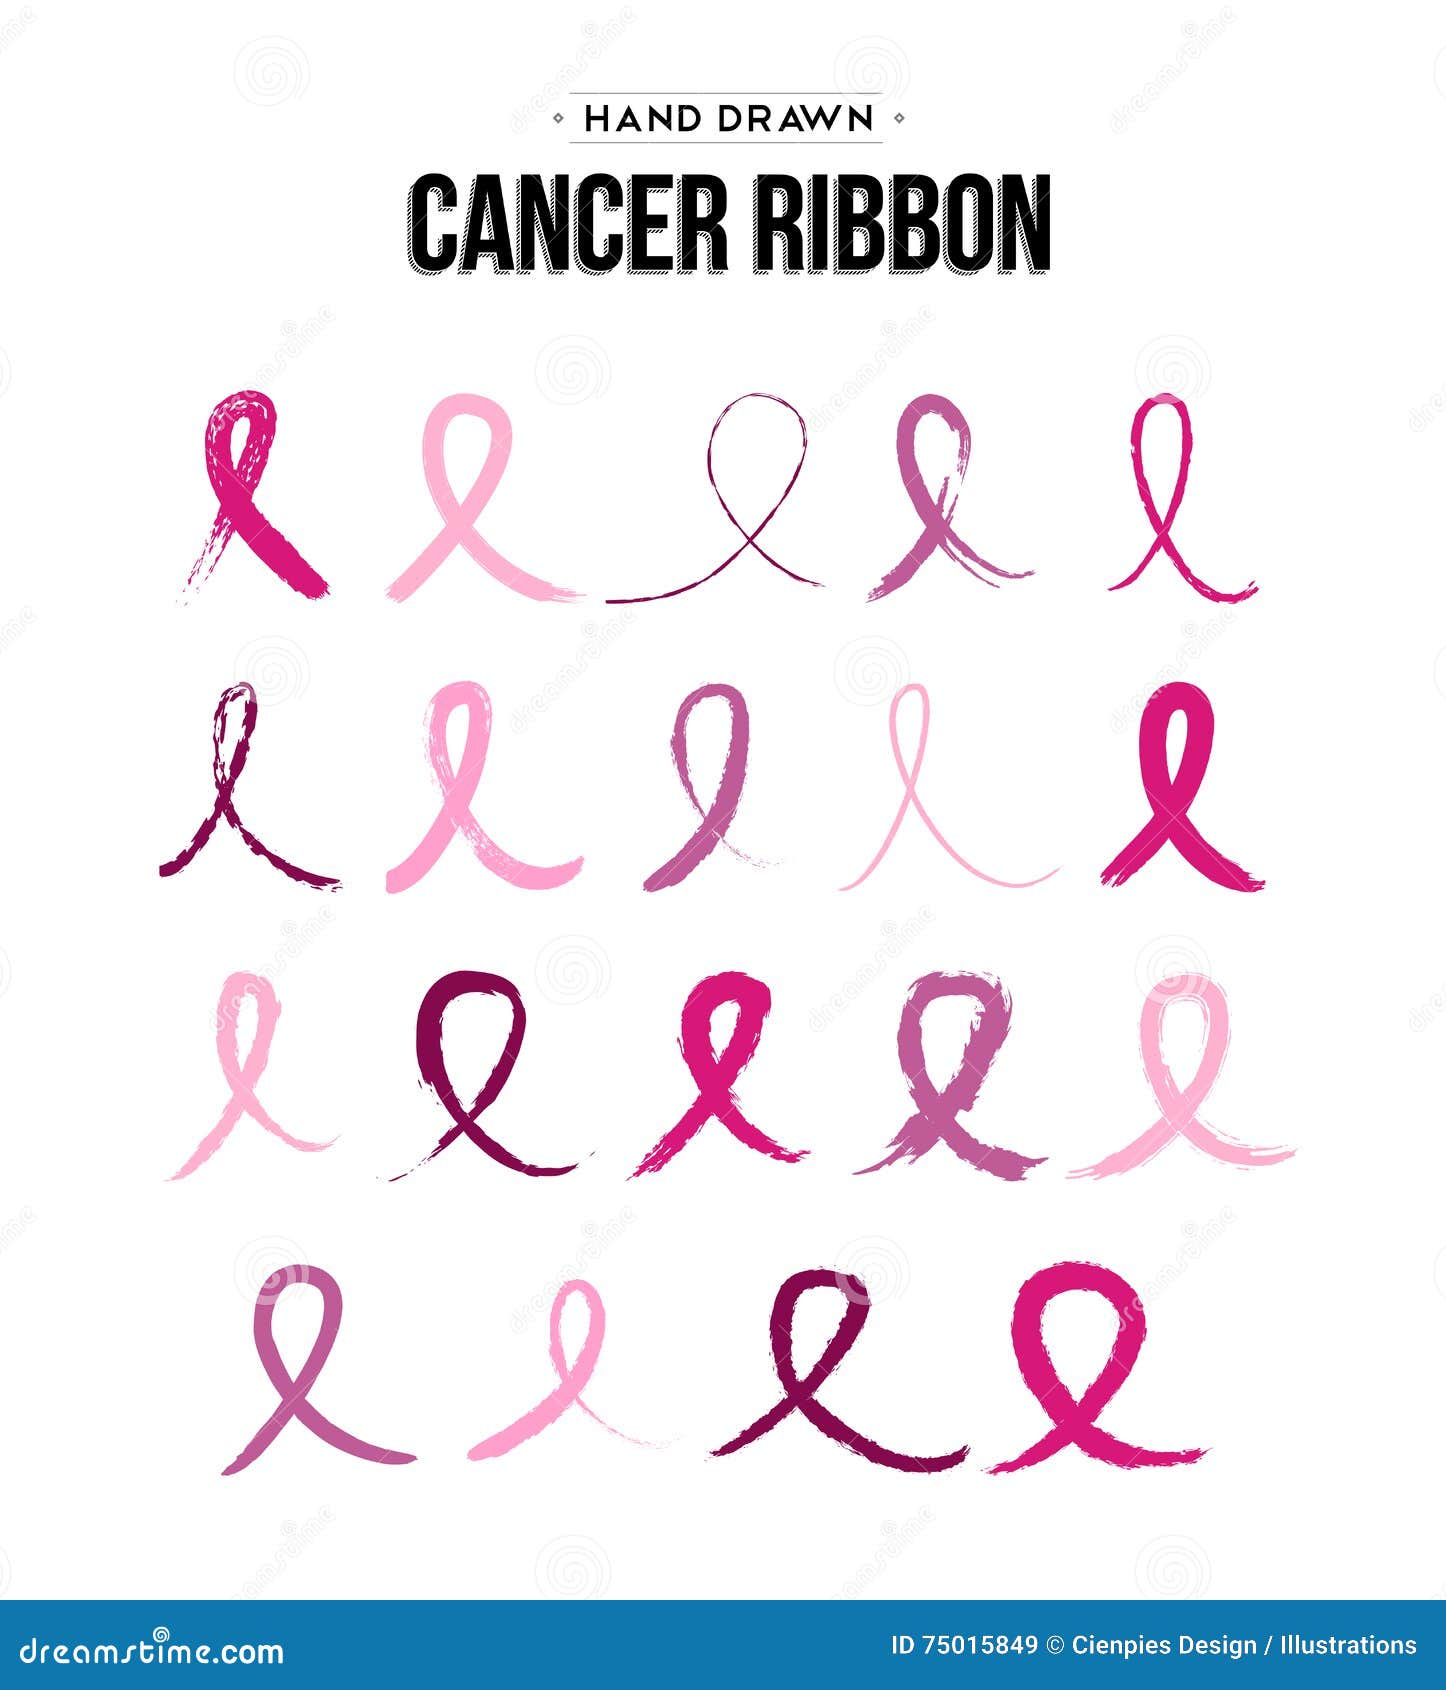 breast cancer ribbon set in hand drawn style